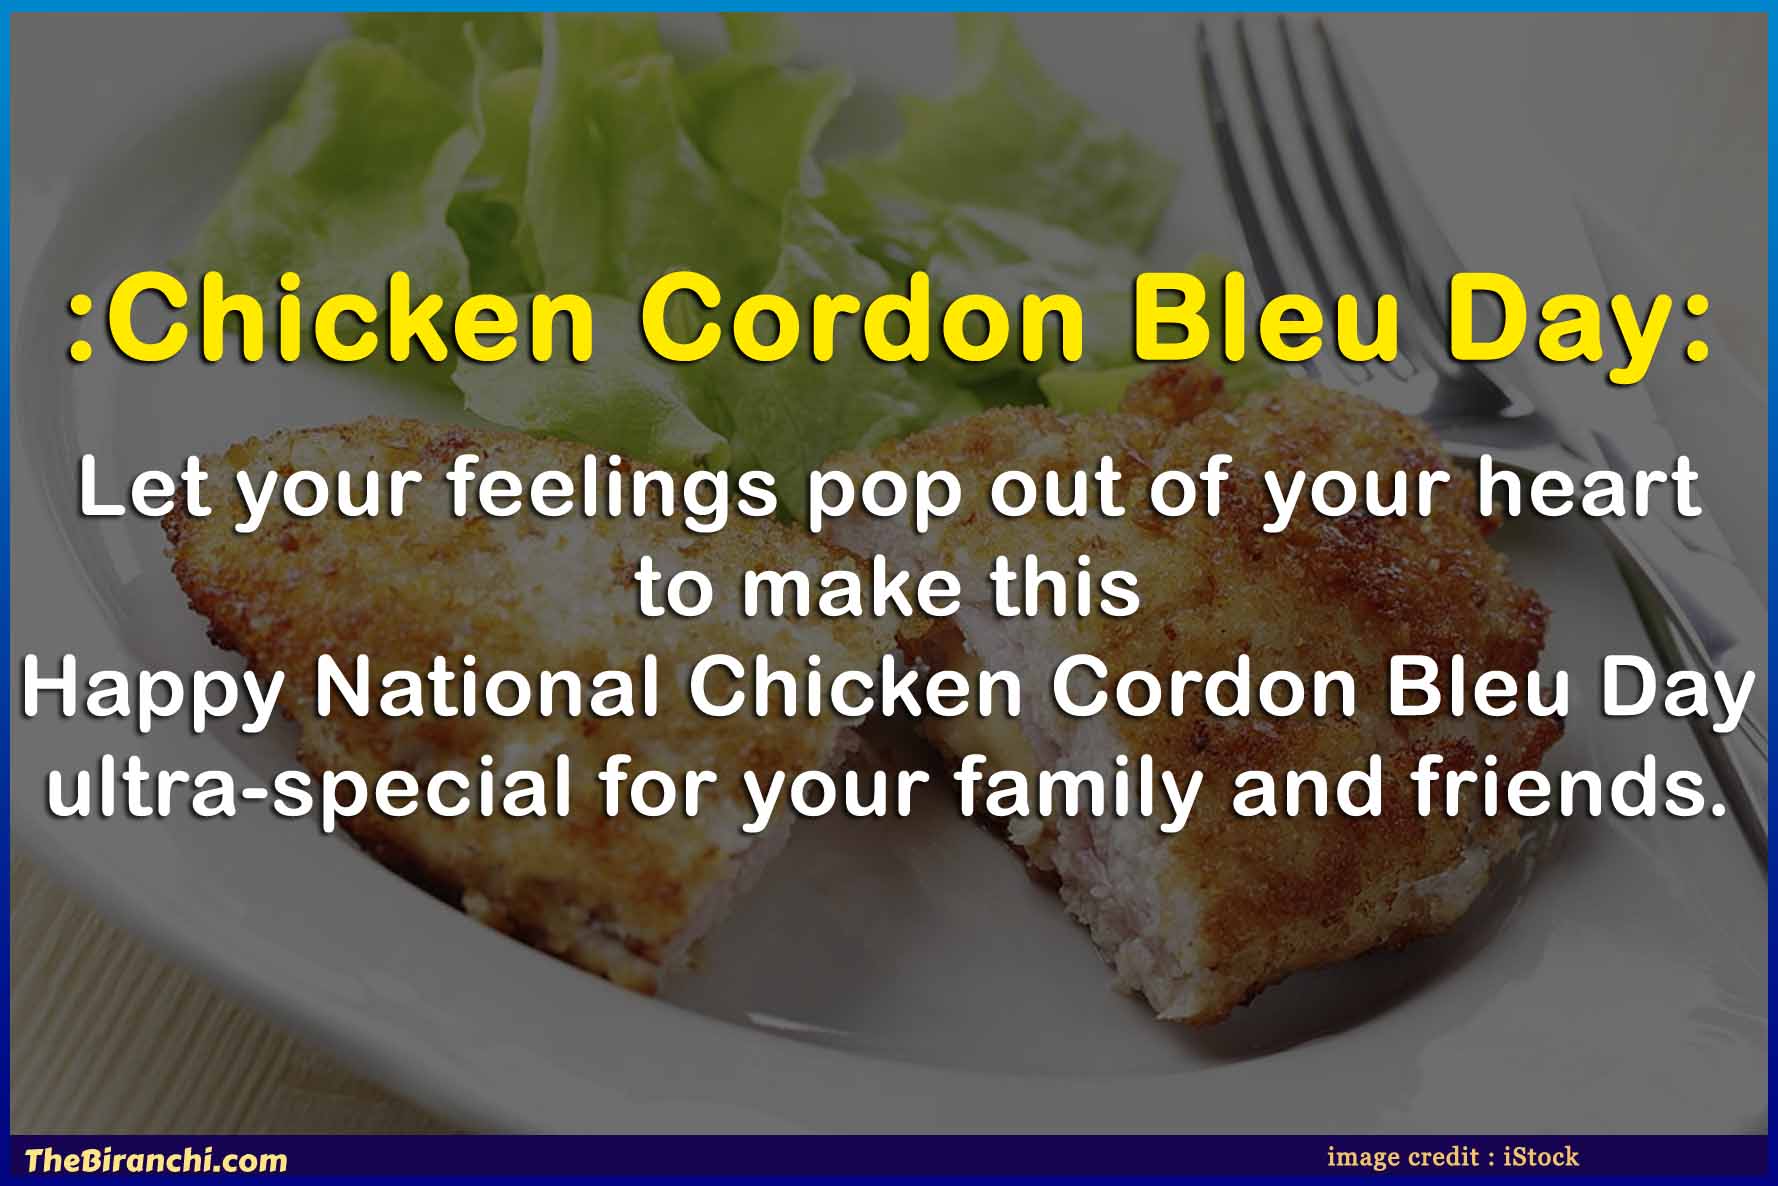 make-this-happy-National-Chicken-Cordon-Bleu-Day-messages-ultra-special